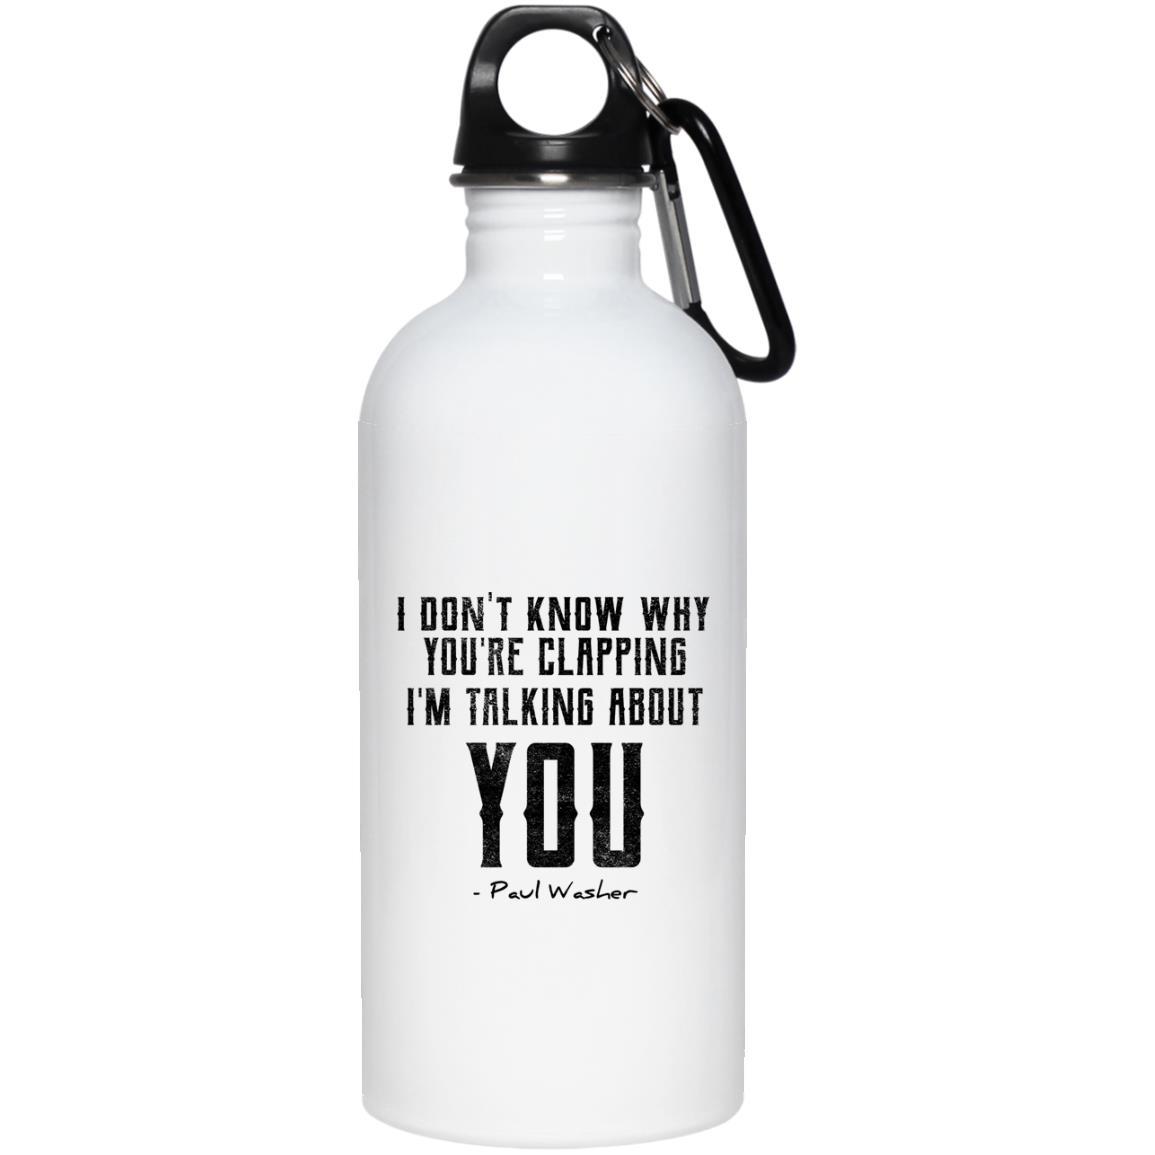 I Don't Know Why You're Clapping (20oz Steel Water Bottle) - SDG Clothing